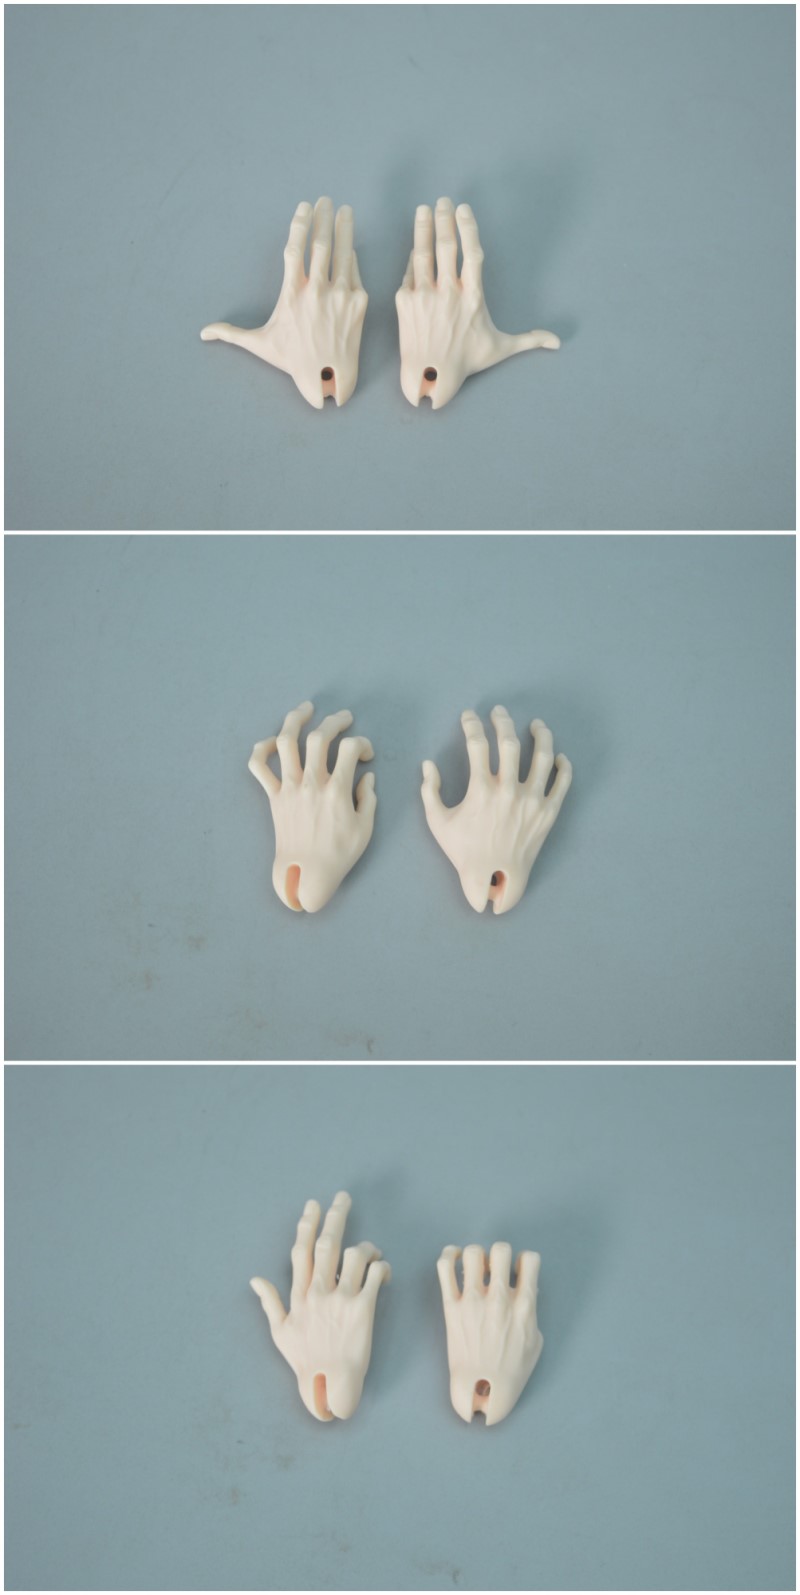 1 4bjd doll sd doll hand type 4 points male doll shape hand can change hands